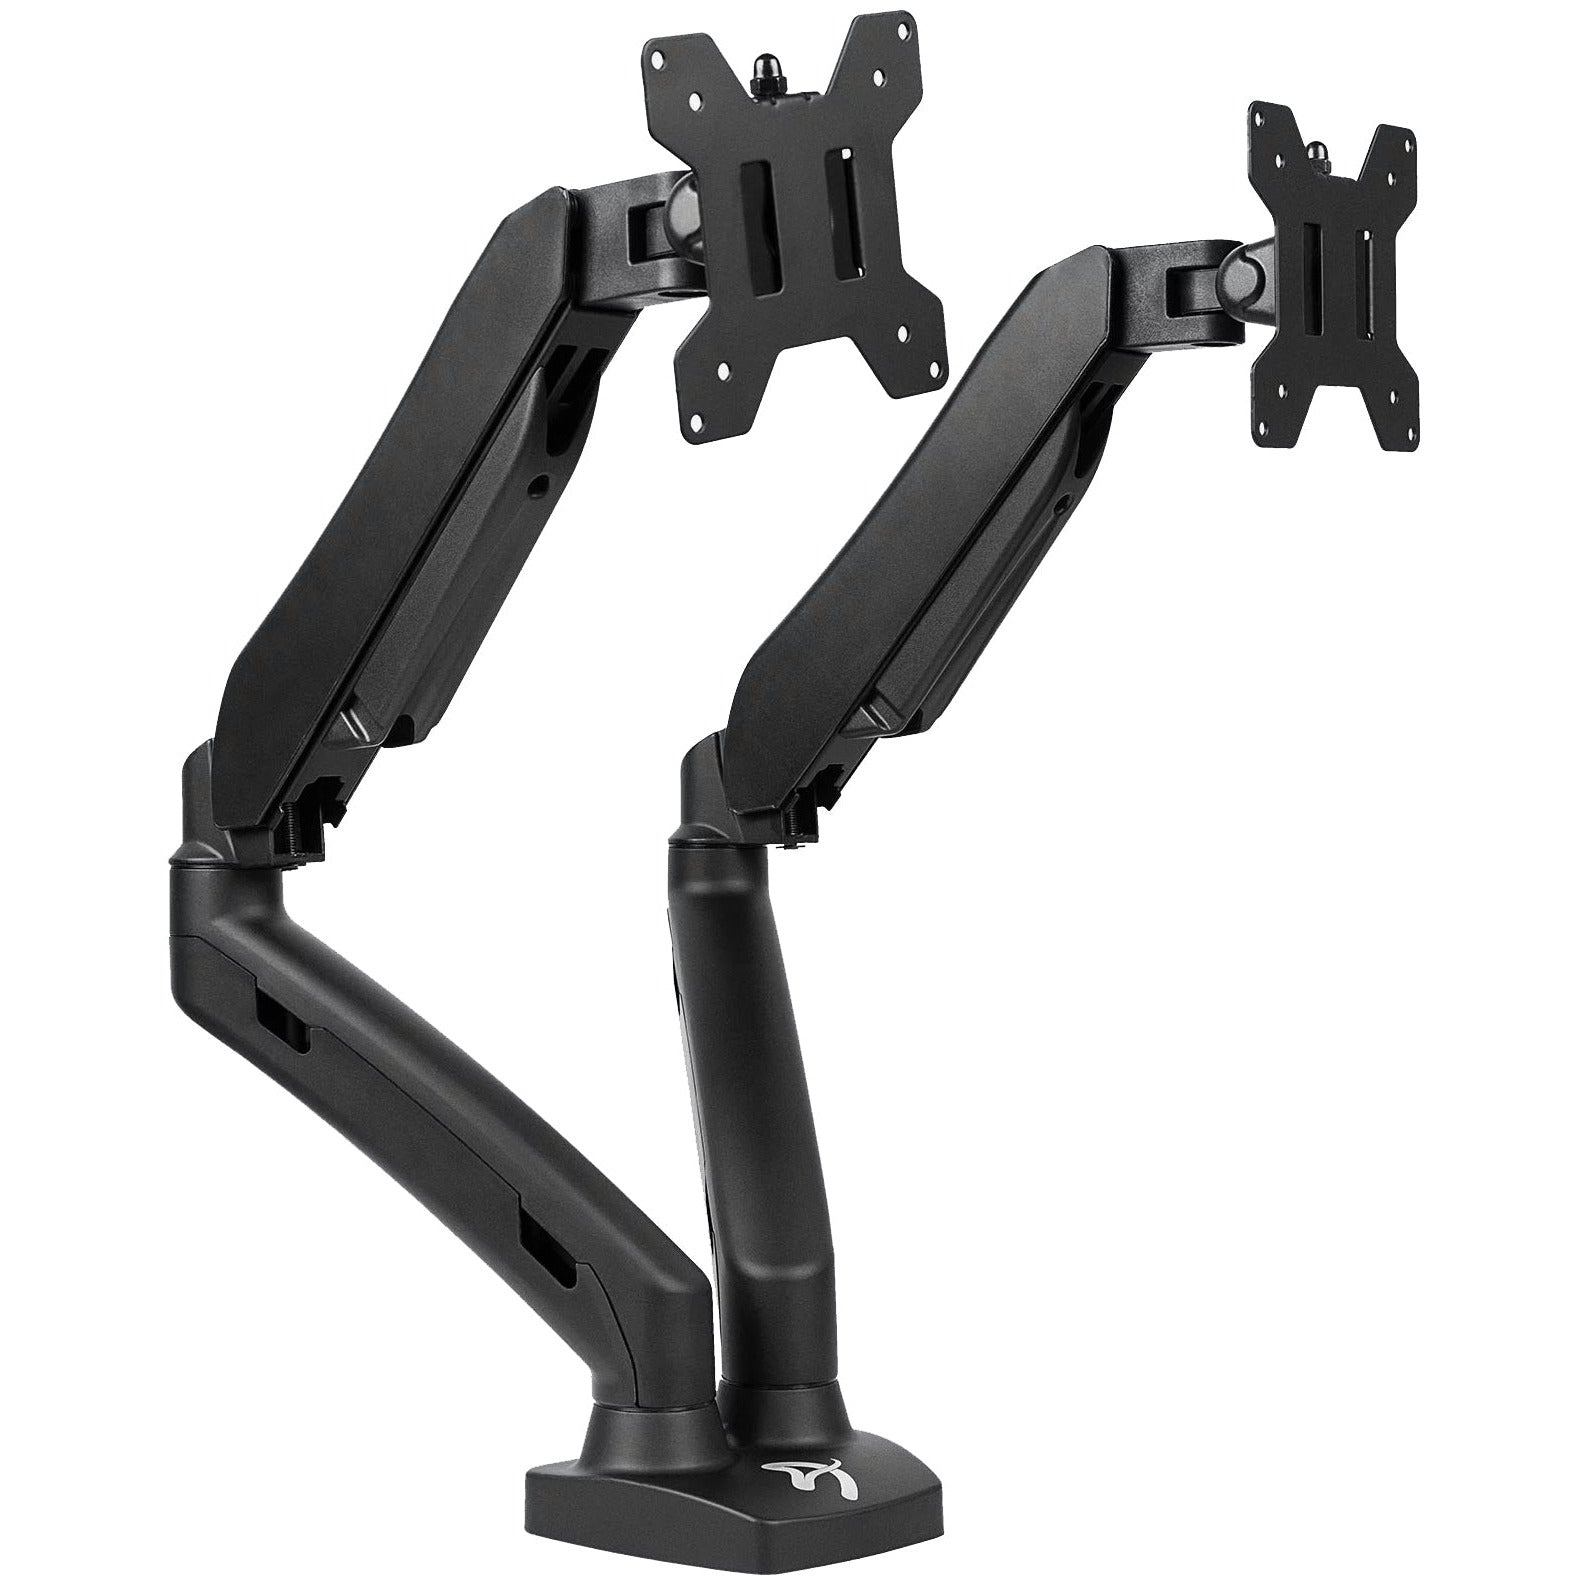 Arozzi Alzare Dual Gas Lift Monitor Arm 360° Screen Rotation Cable Management - Black